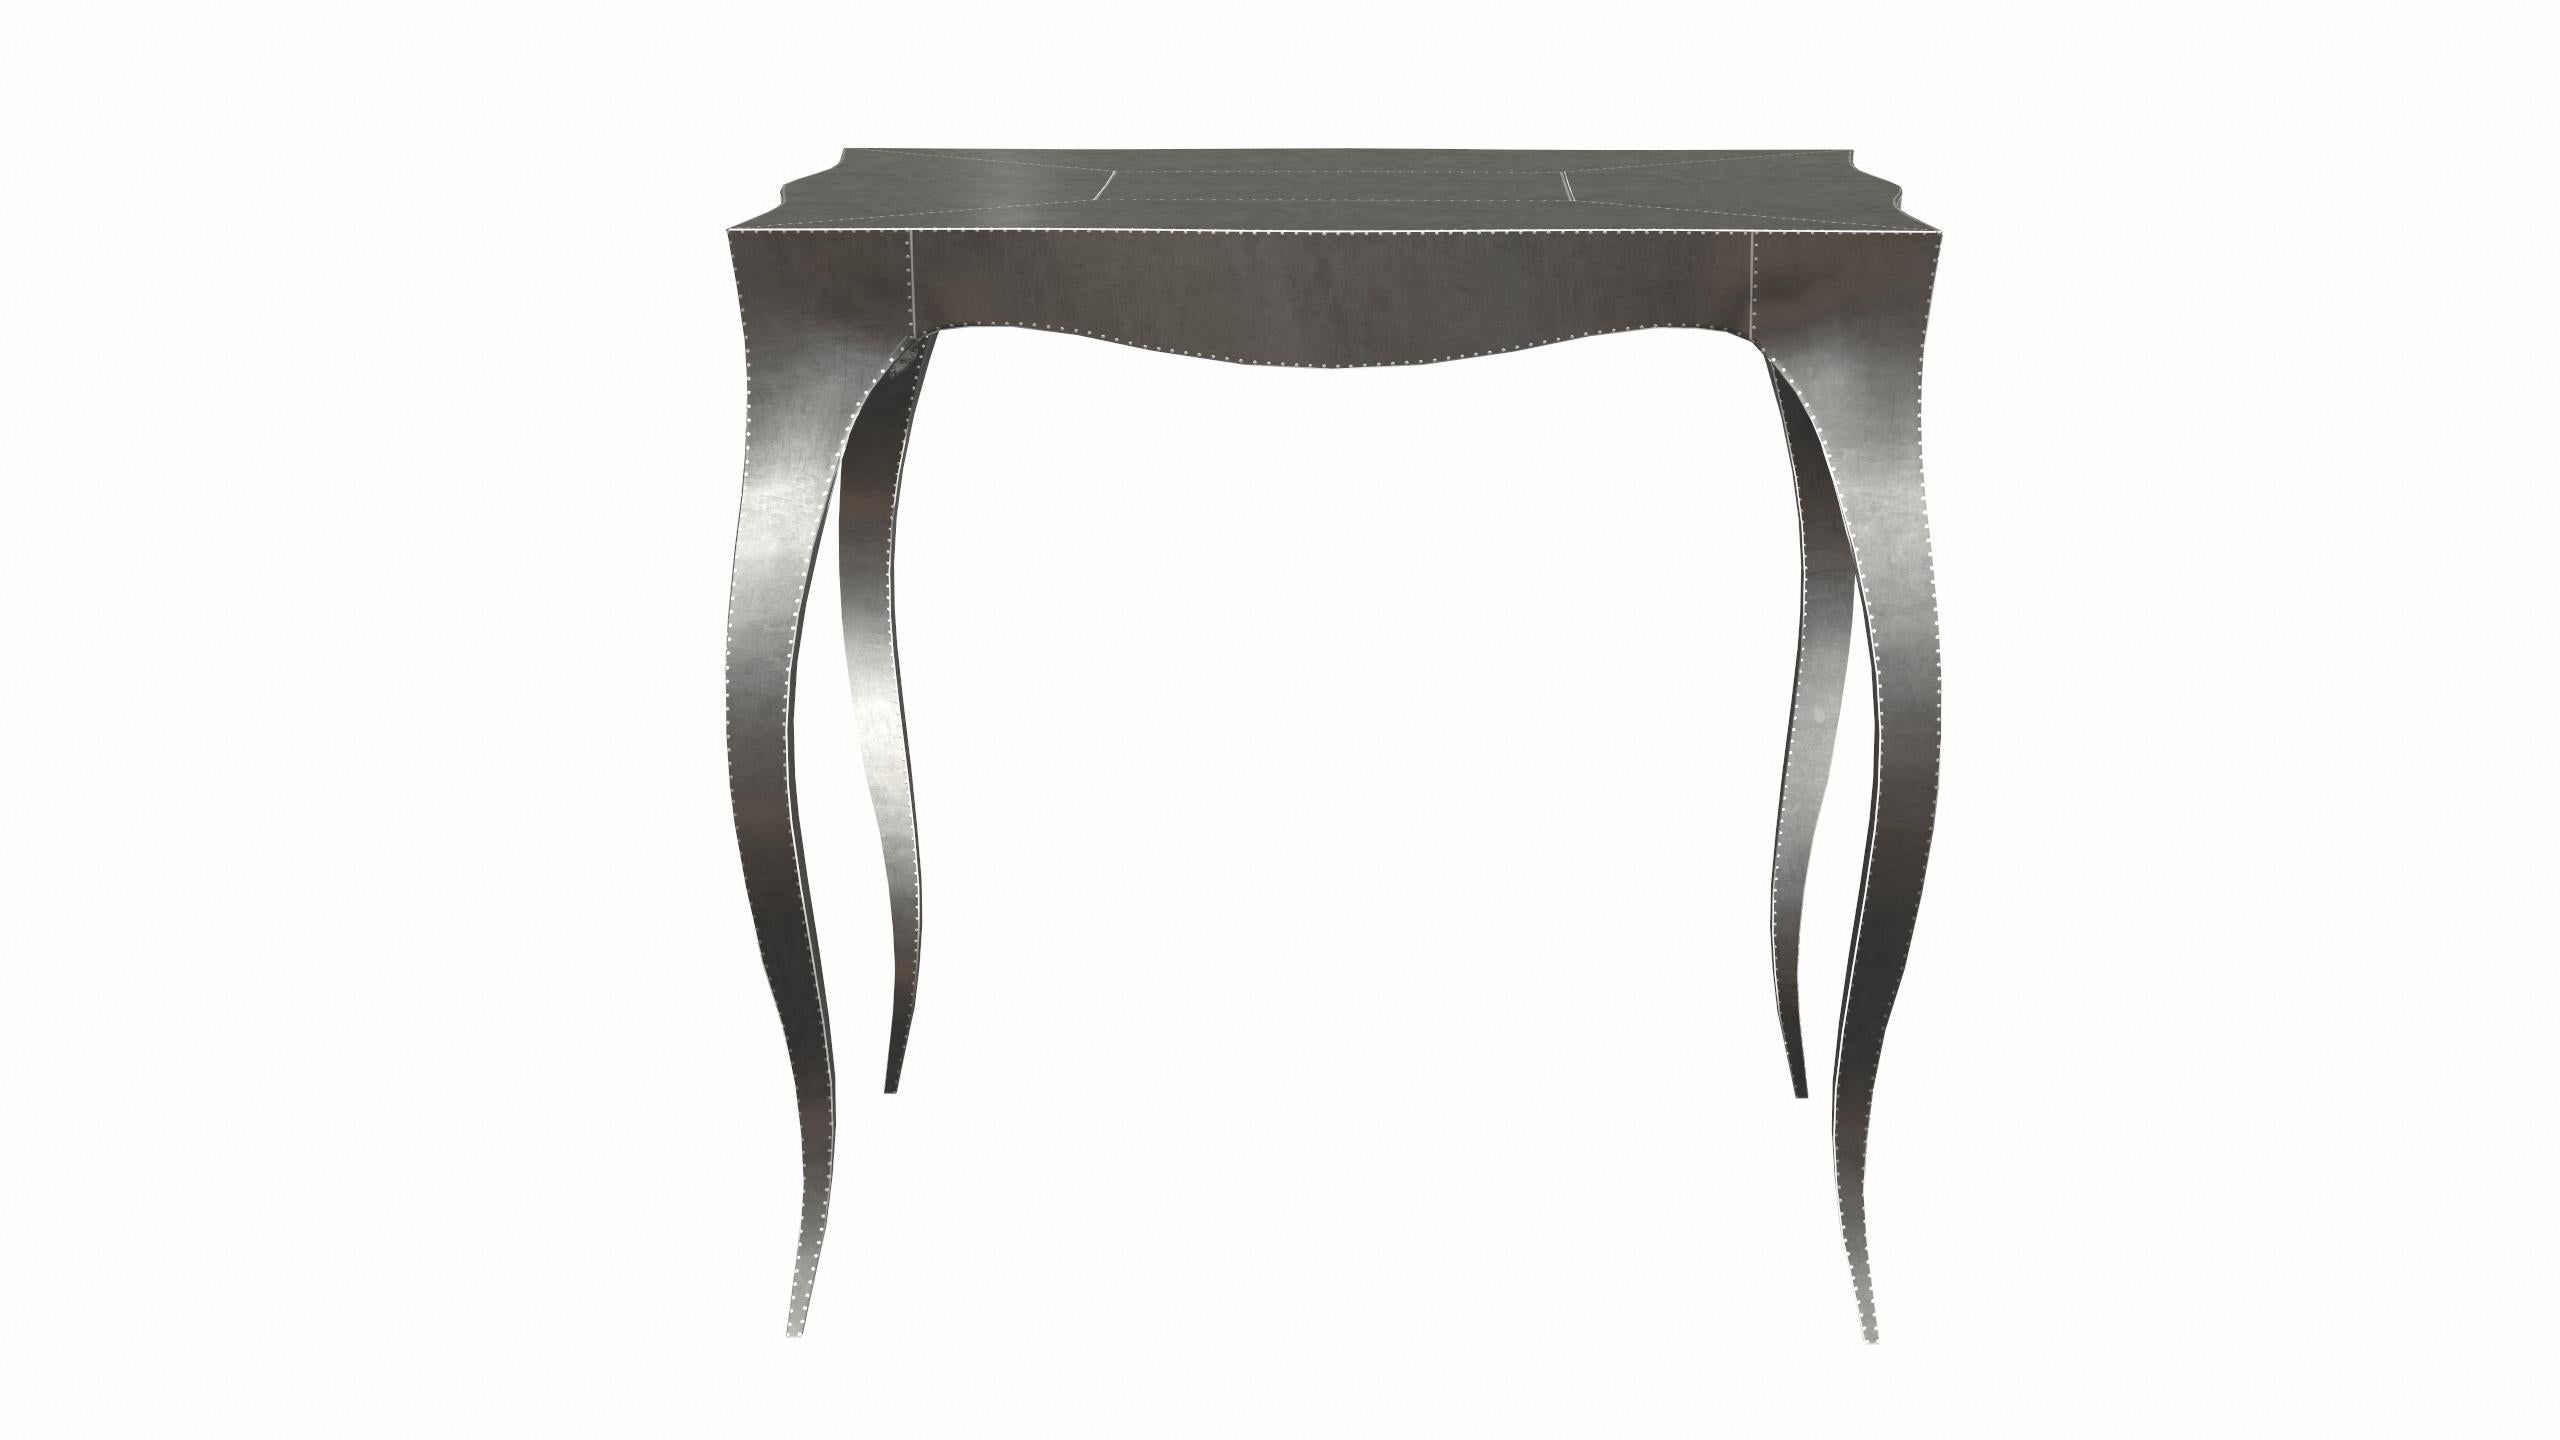 American Louise Art Deco Center Tables Smooth White Bronze by Paul Mathieu for S. Odegard For Sale